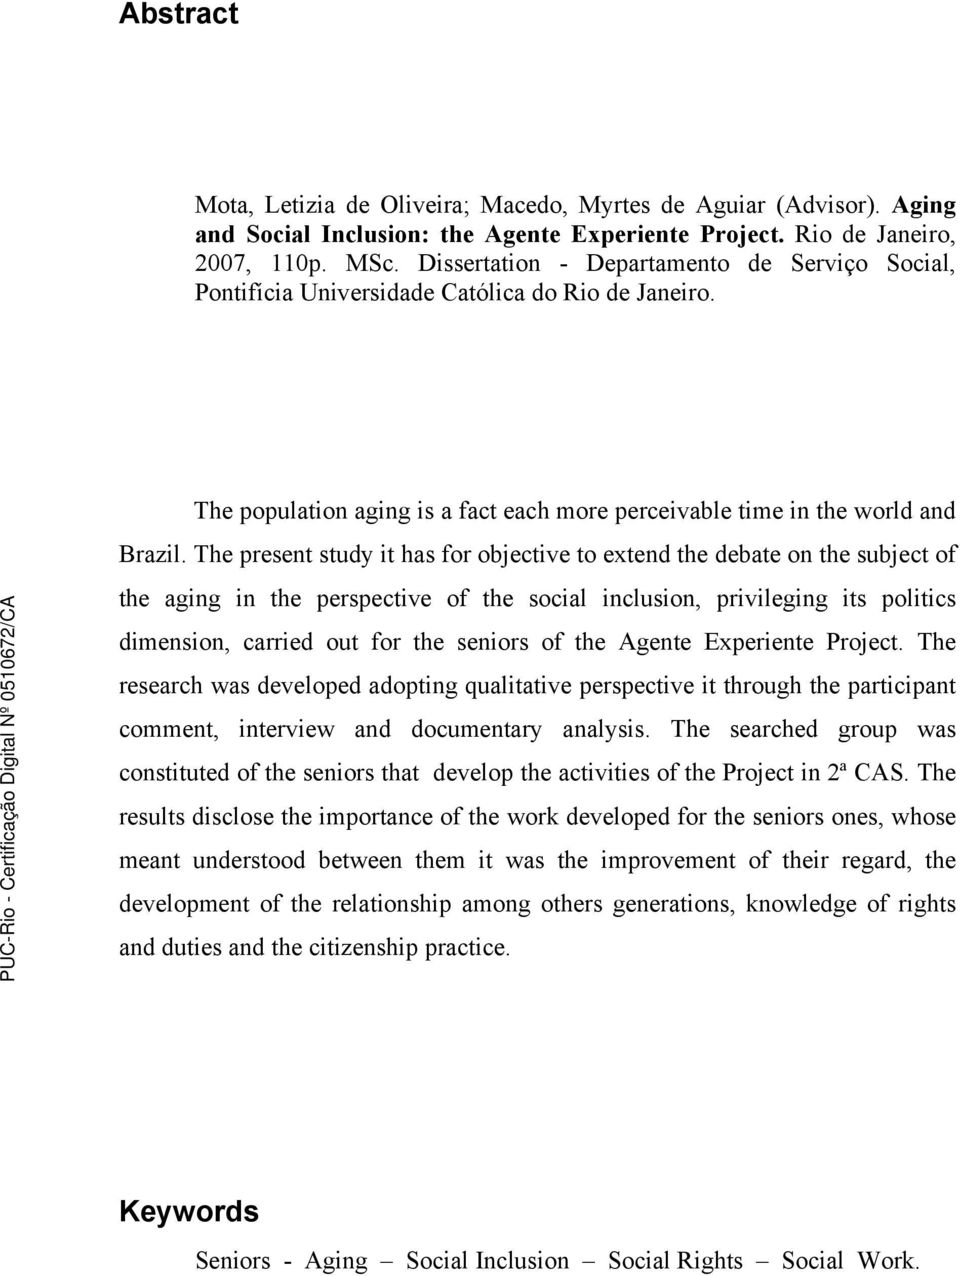 The present study it has for objective to extend the debate on the subject of the aging in the perspective of the social inclusion, privileging its politics dimension, carried out for the seniors of